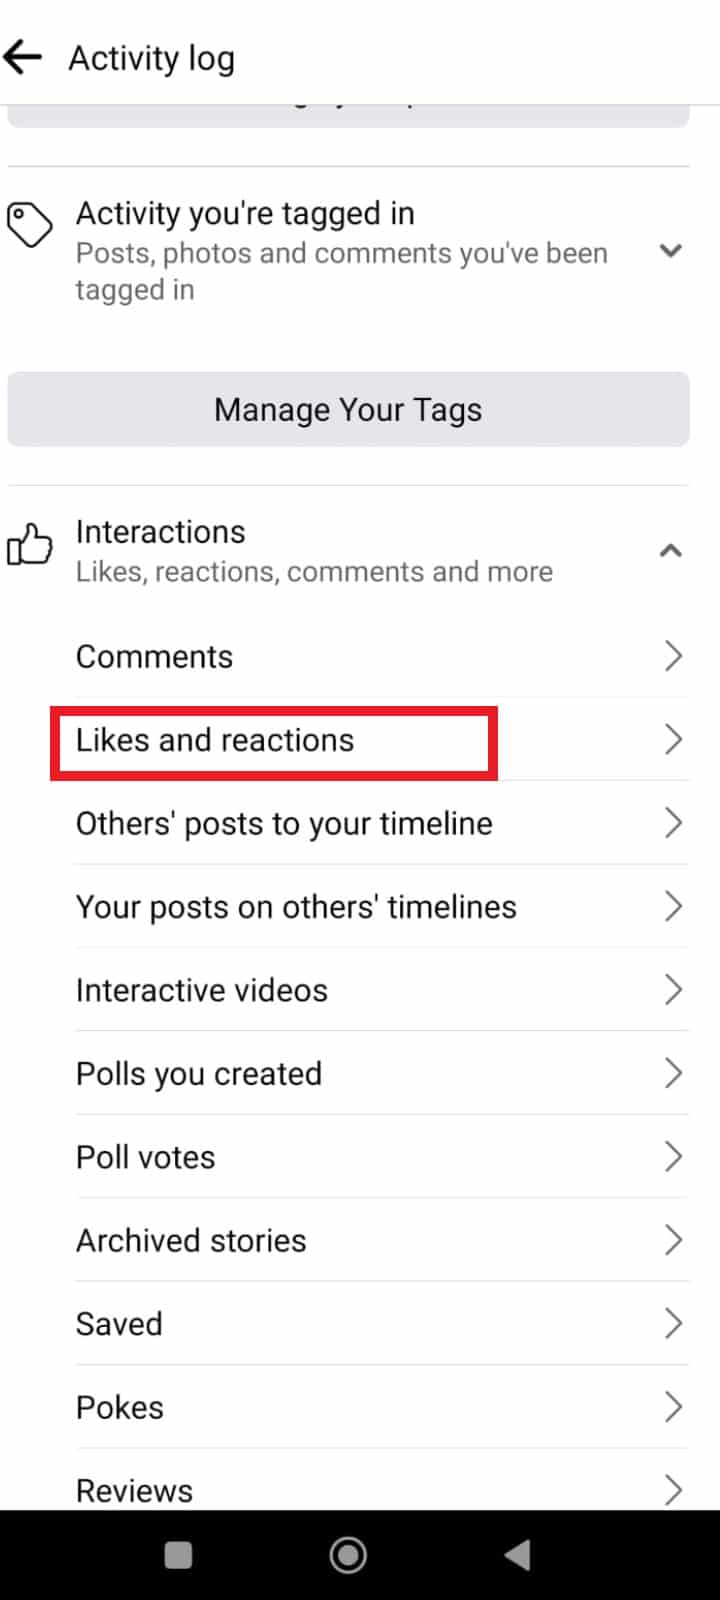 From the drop-down menu, choose Likes and reactions.